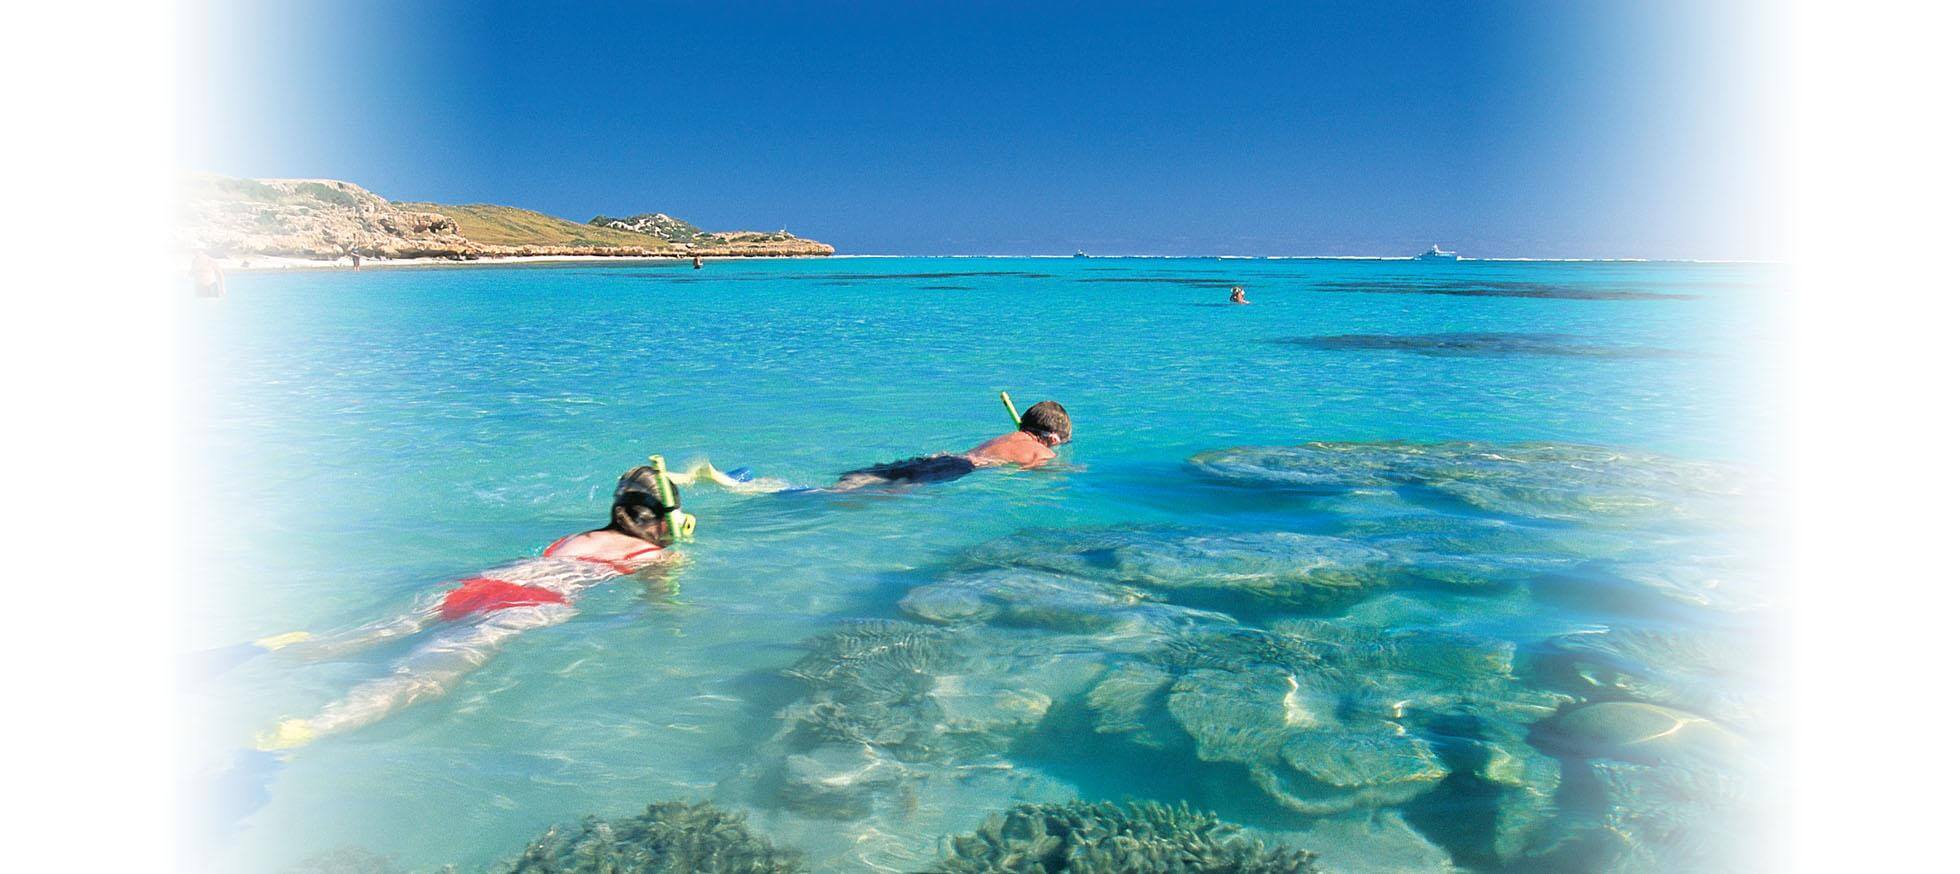 Jurien Bay is... a marine playground and hikers paradise